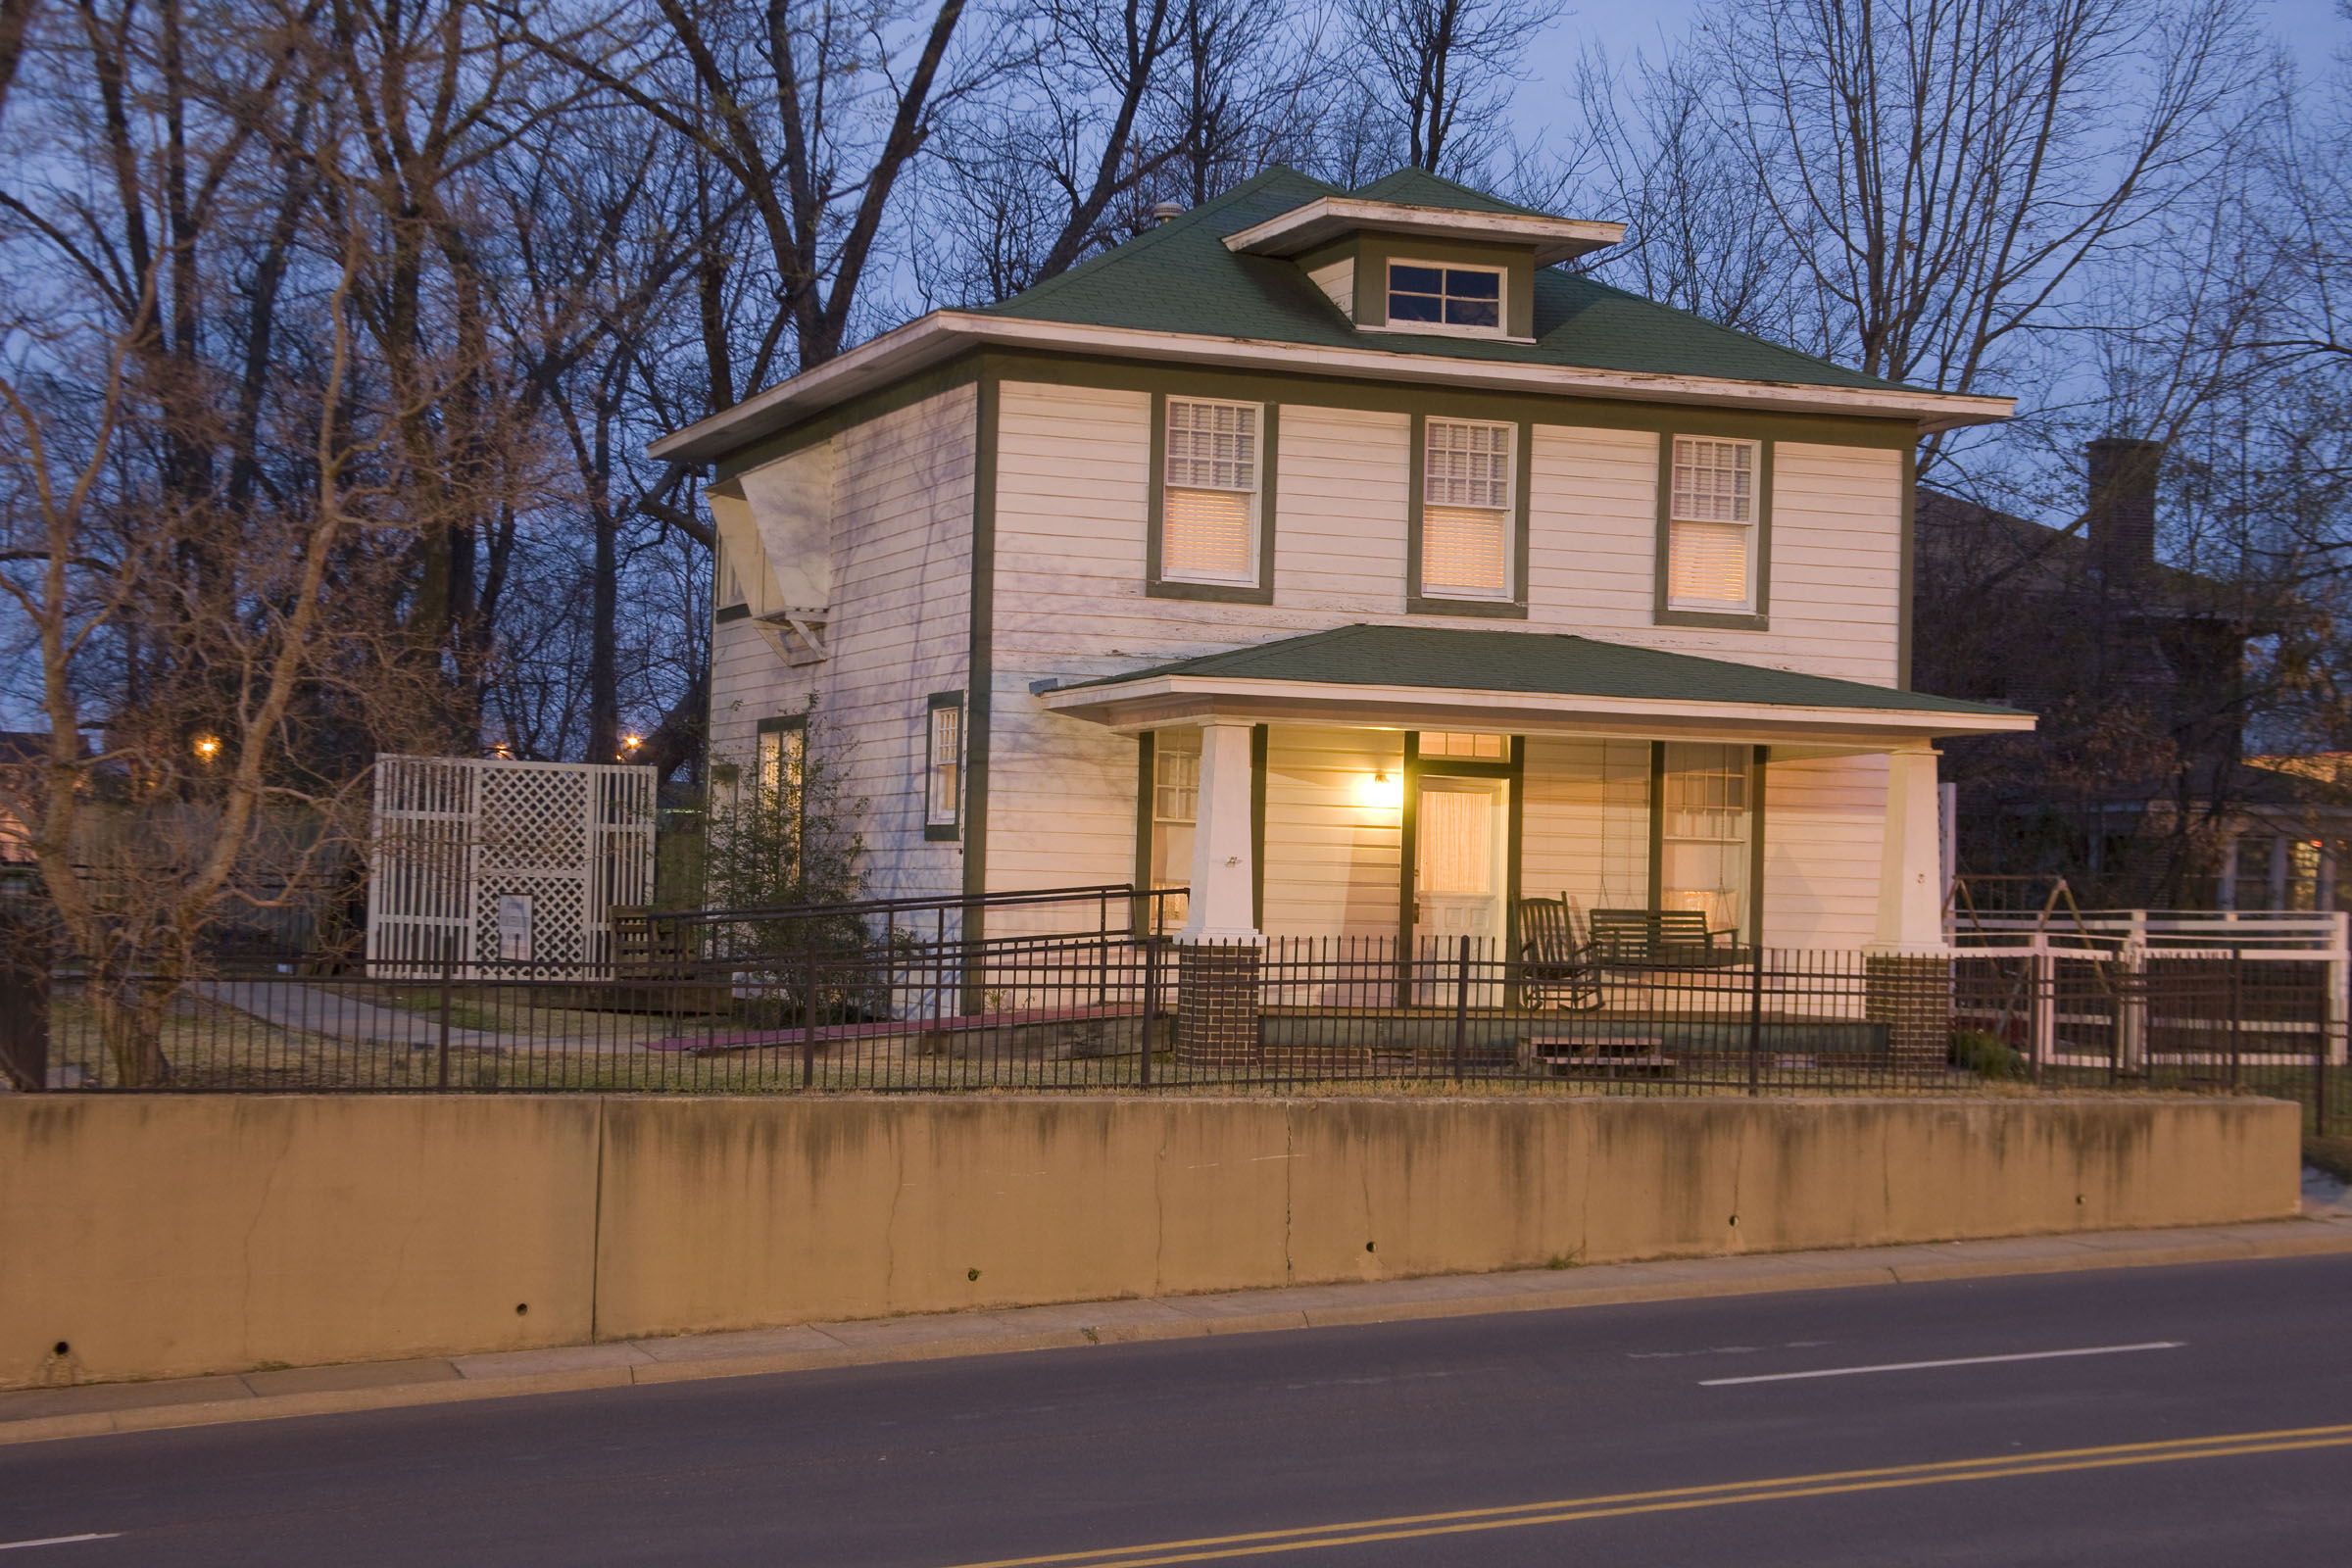 The birthplace home of President Bill Clinton illuminated at dusk.